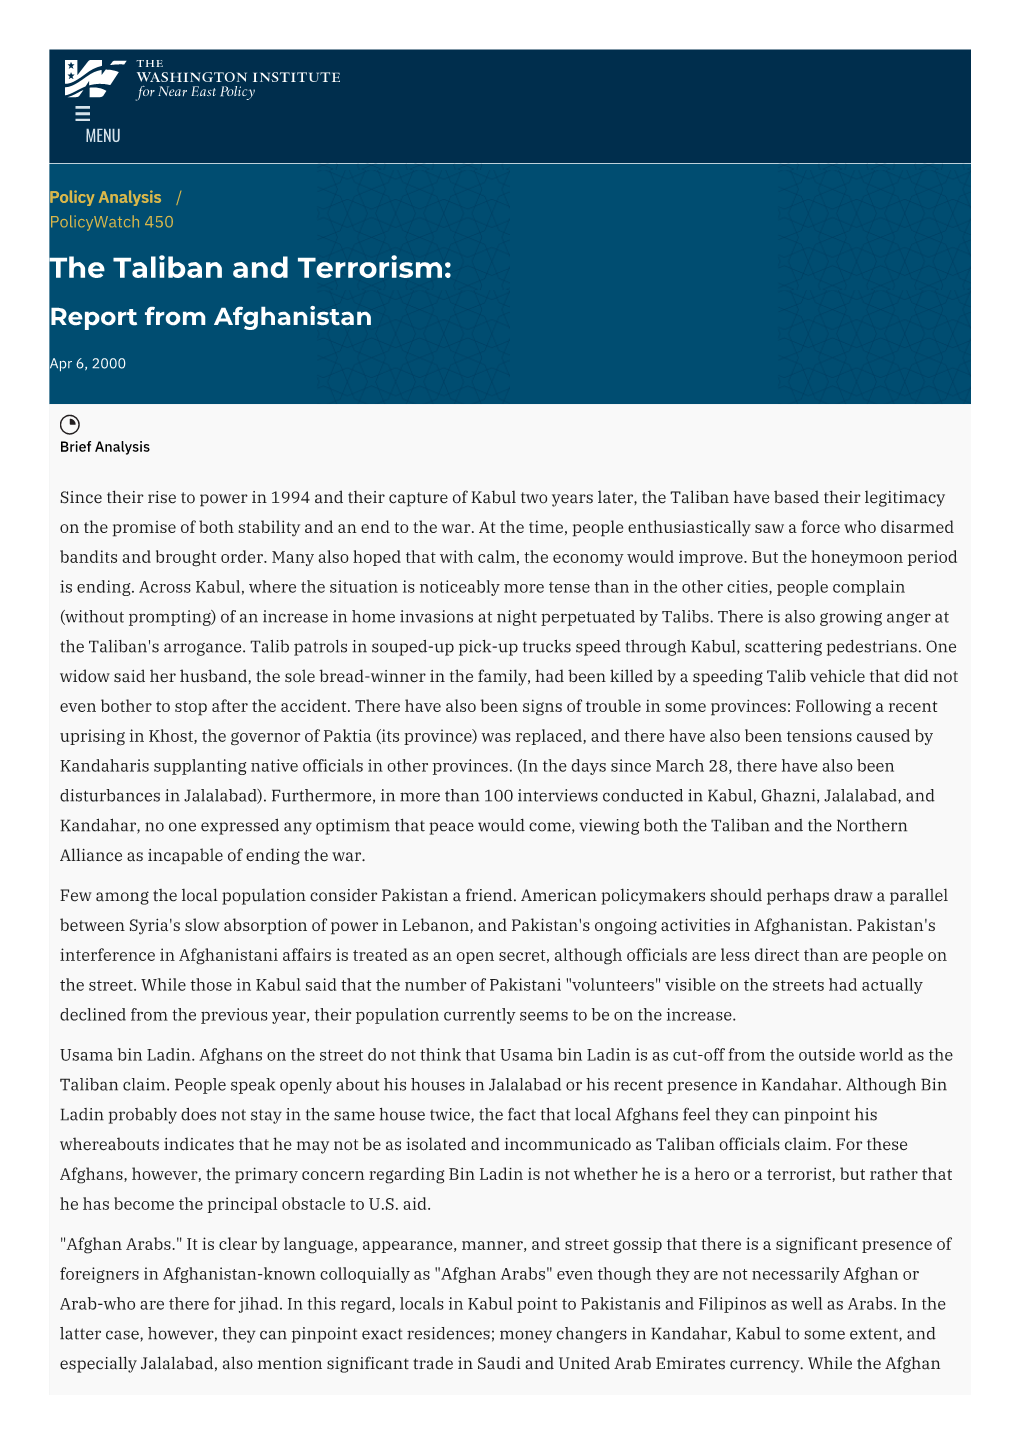 The Taliban and Terrorism: Report from Afghanistan